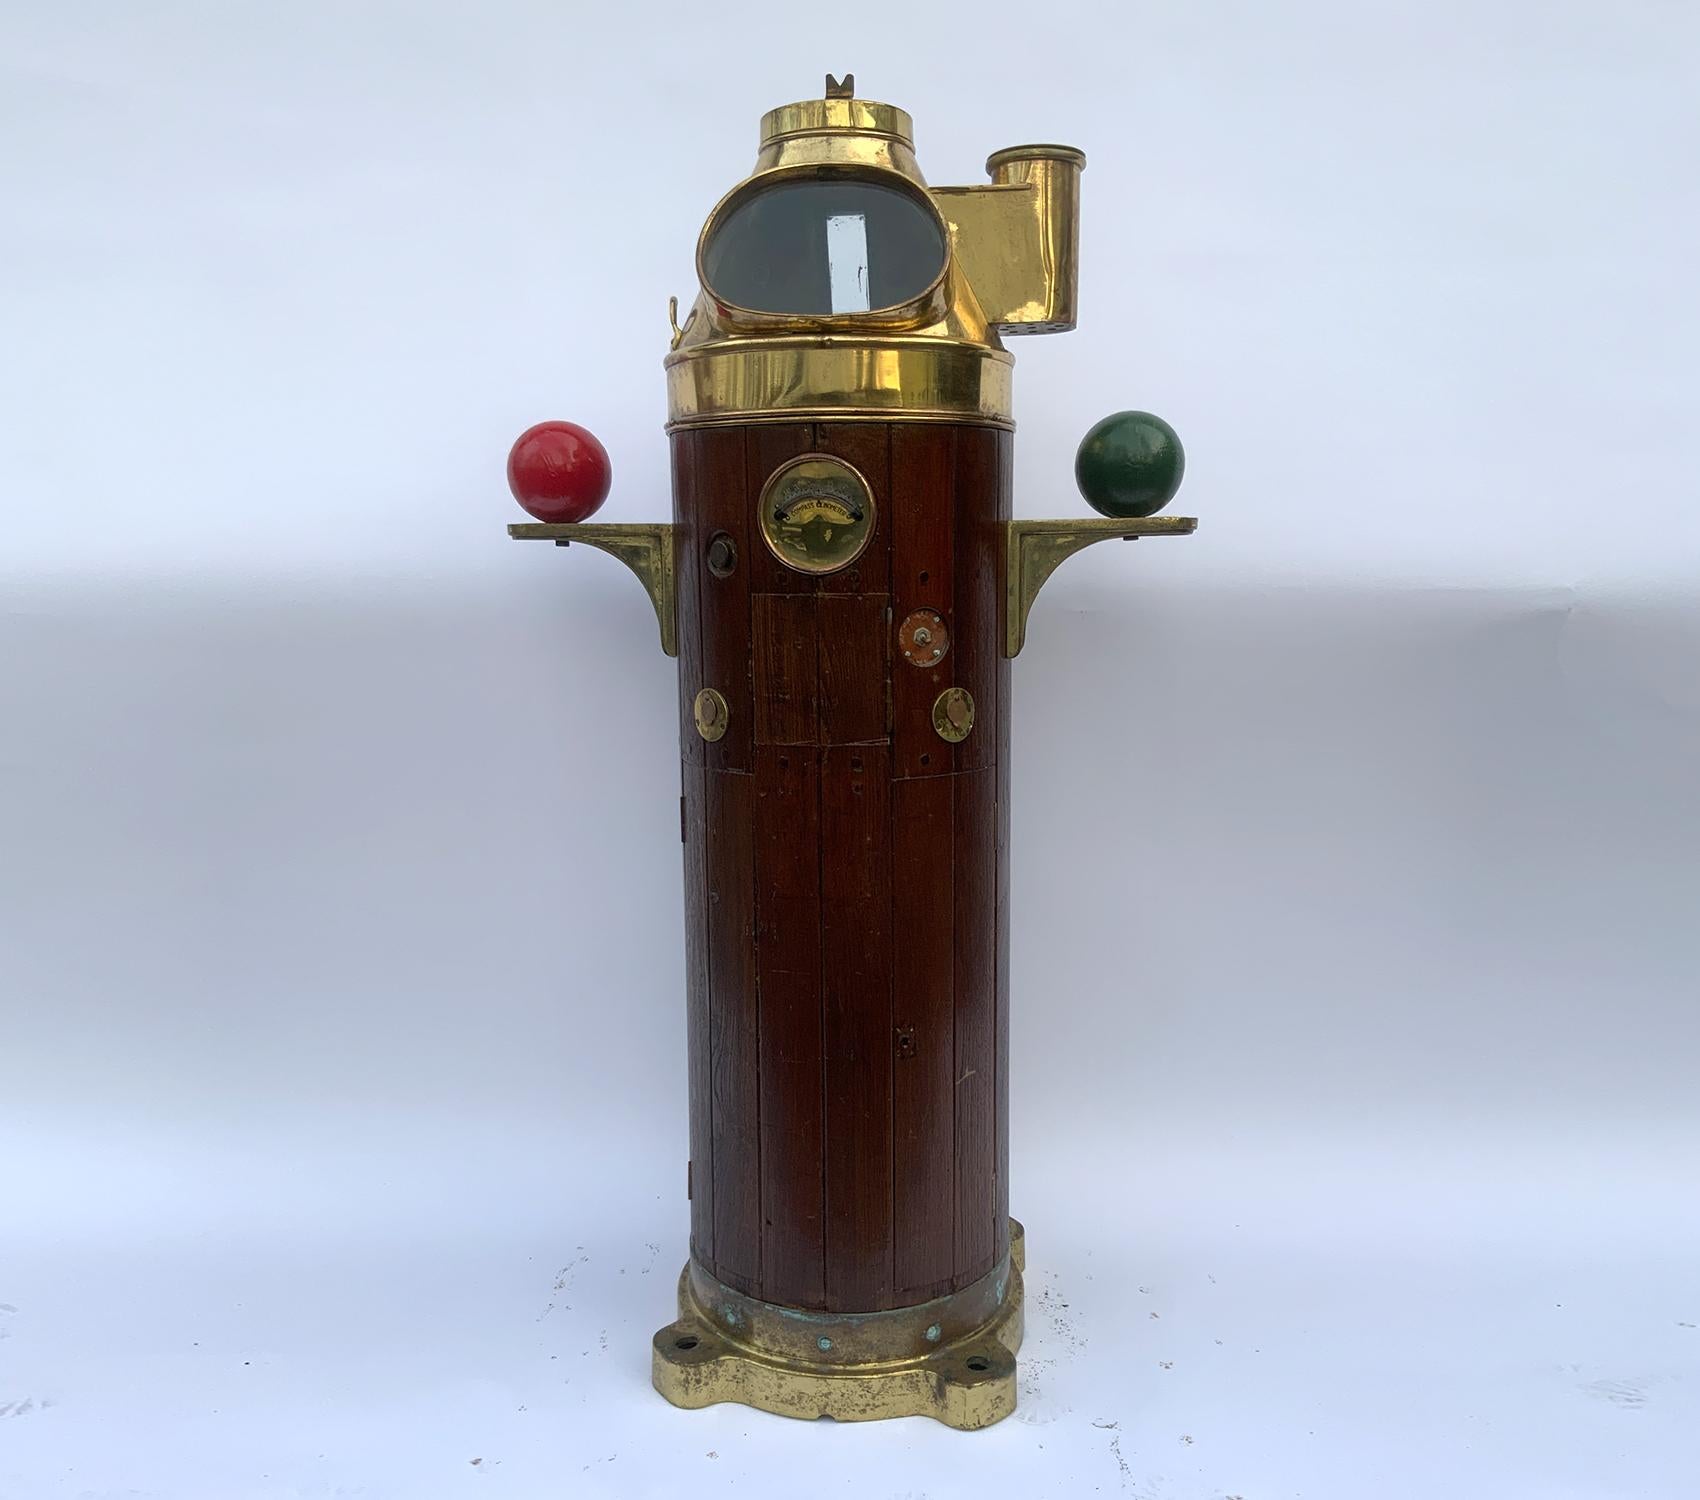 Ships binnacle with gimballed compass by Nunotani Keiki Seisakusho of Amagasaki Japan. Teak binnacle has a heavy brass collar at base. Compass is mounted to base and is fitted with a brass hood with large viewing port. Clinometer on front. Iron